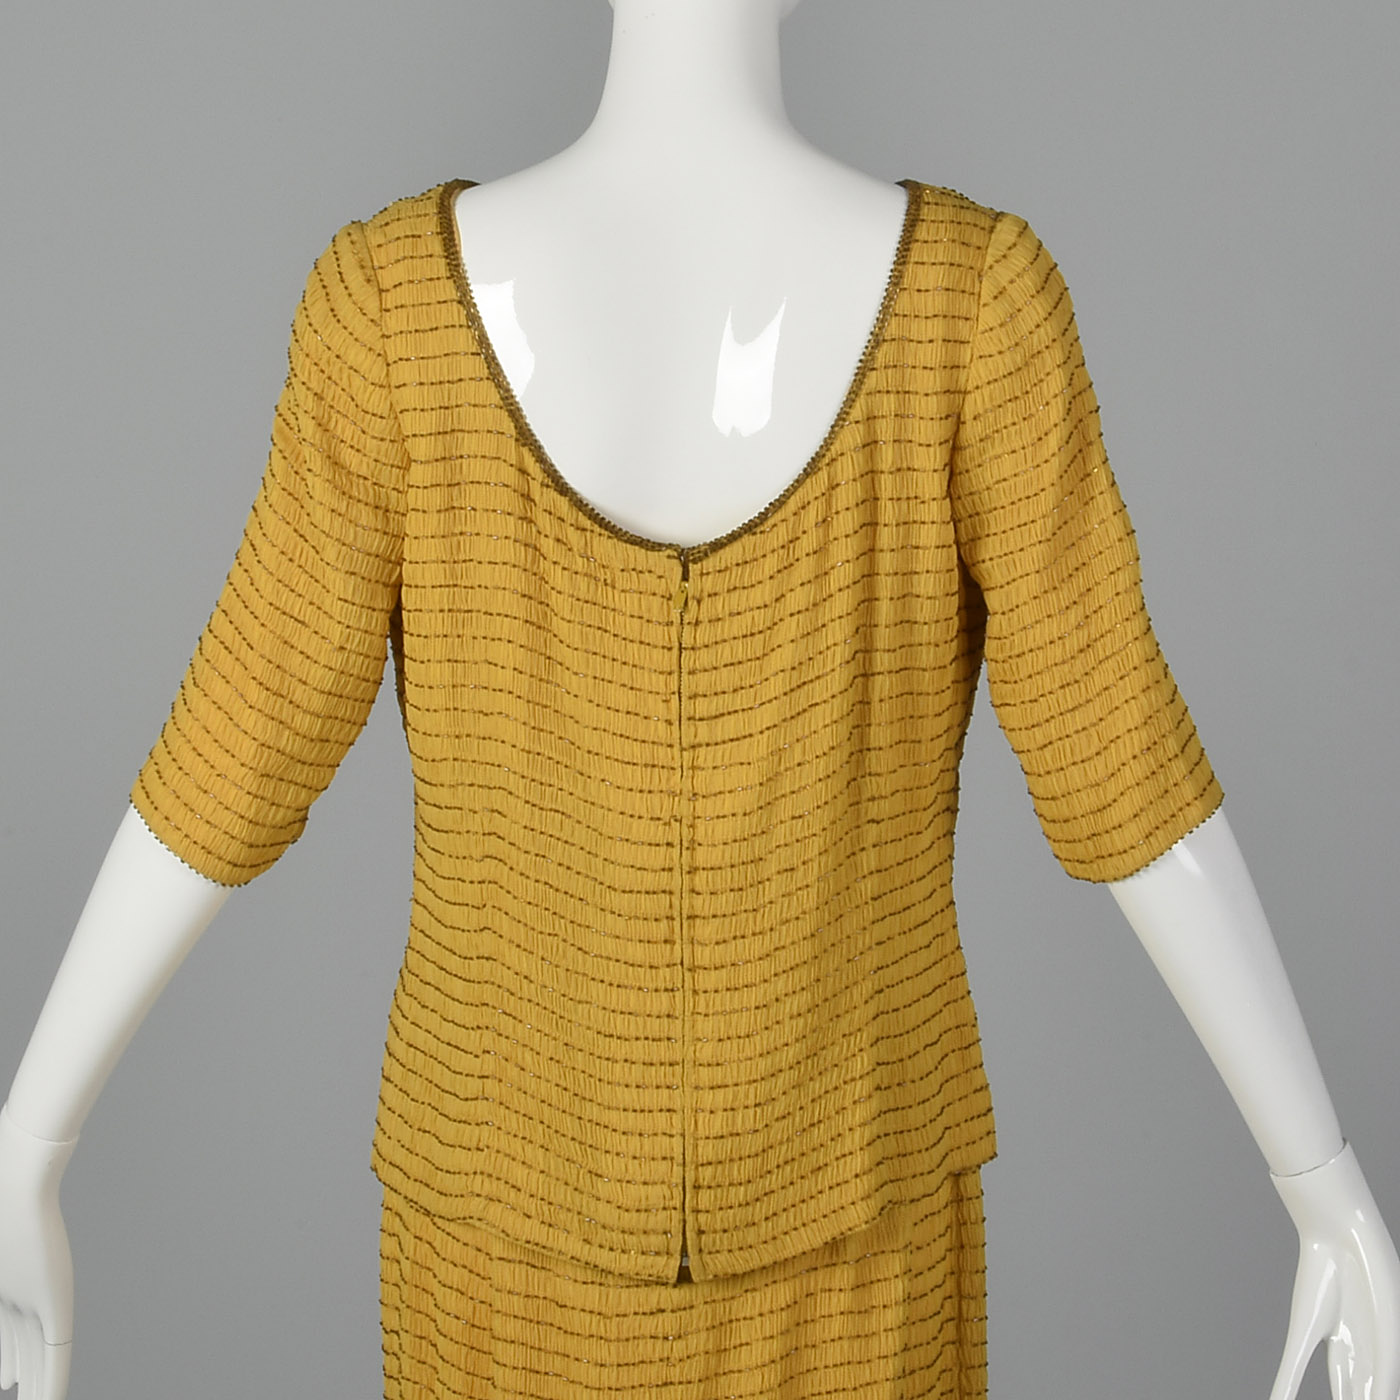 1960s Yellow Silk Dress with Beads